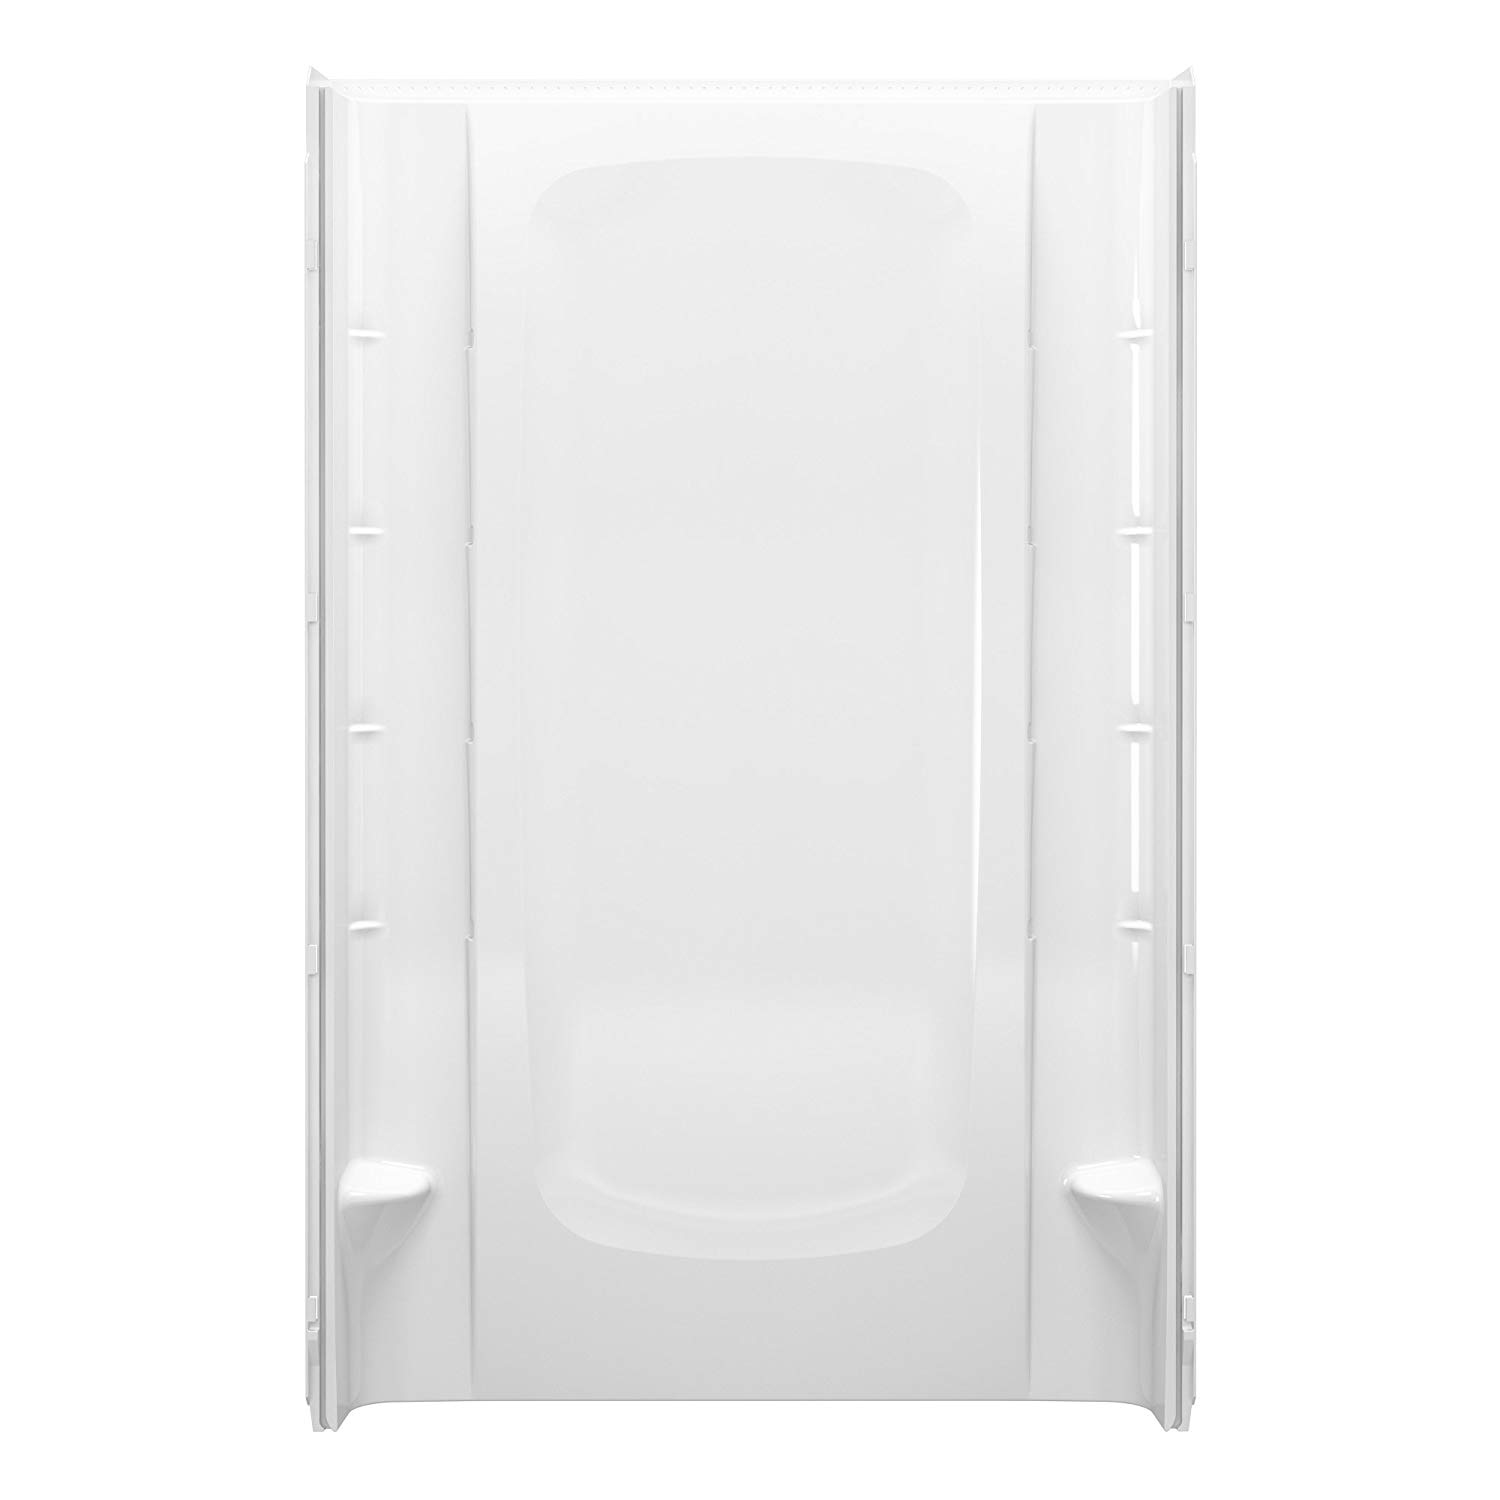 BACK WALL 48X72-1/2 WHT 72322100-0 STORE+